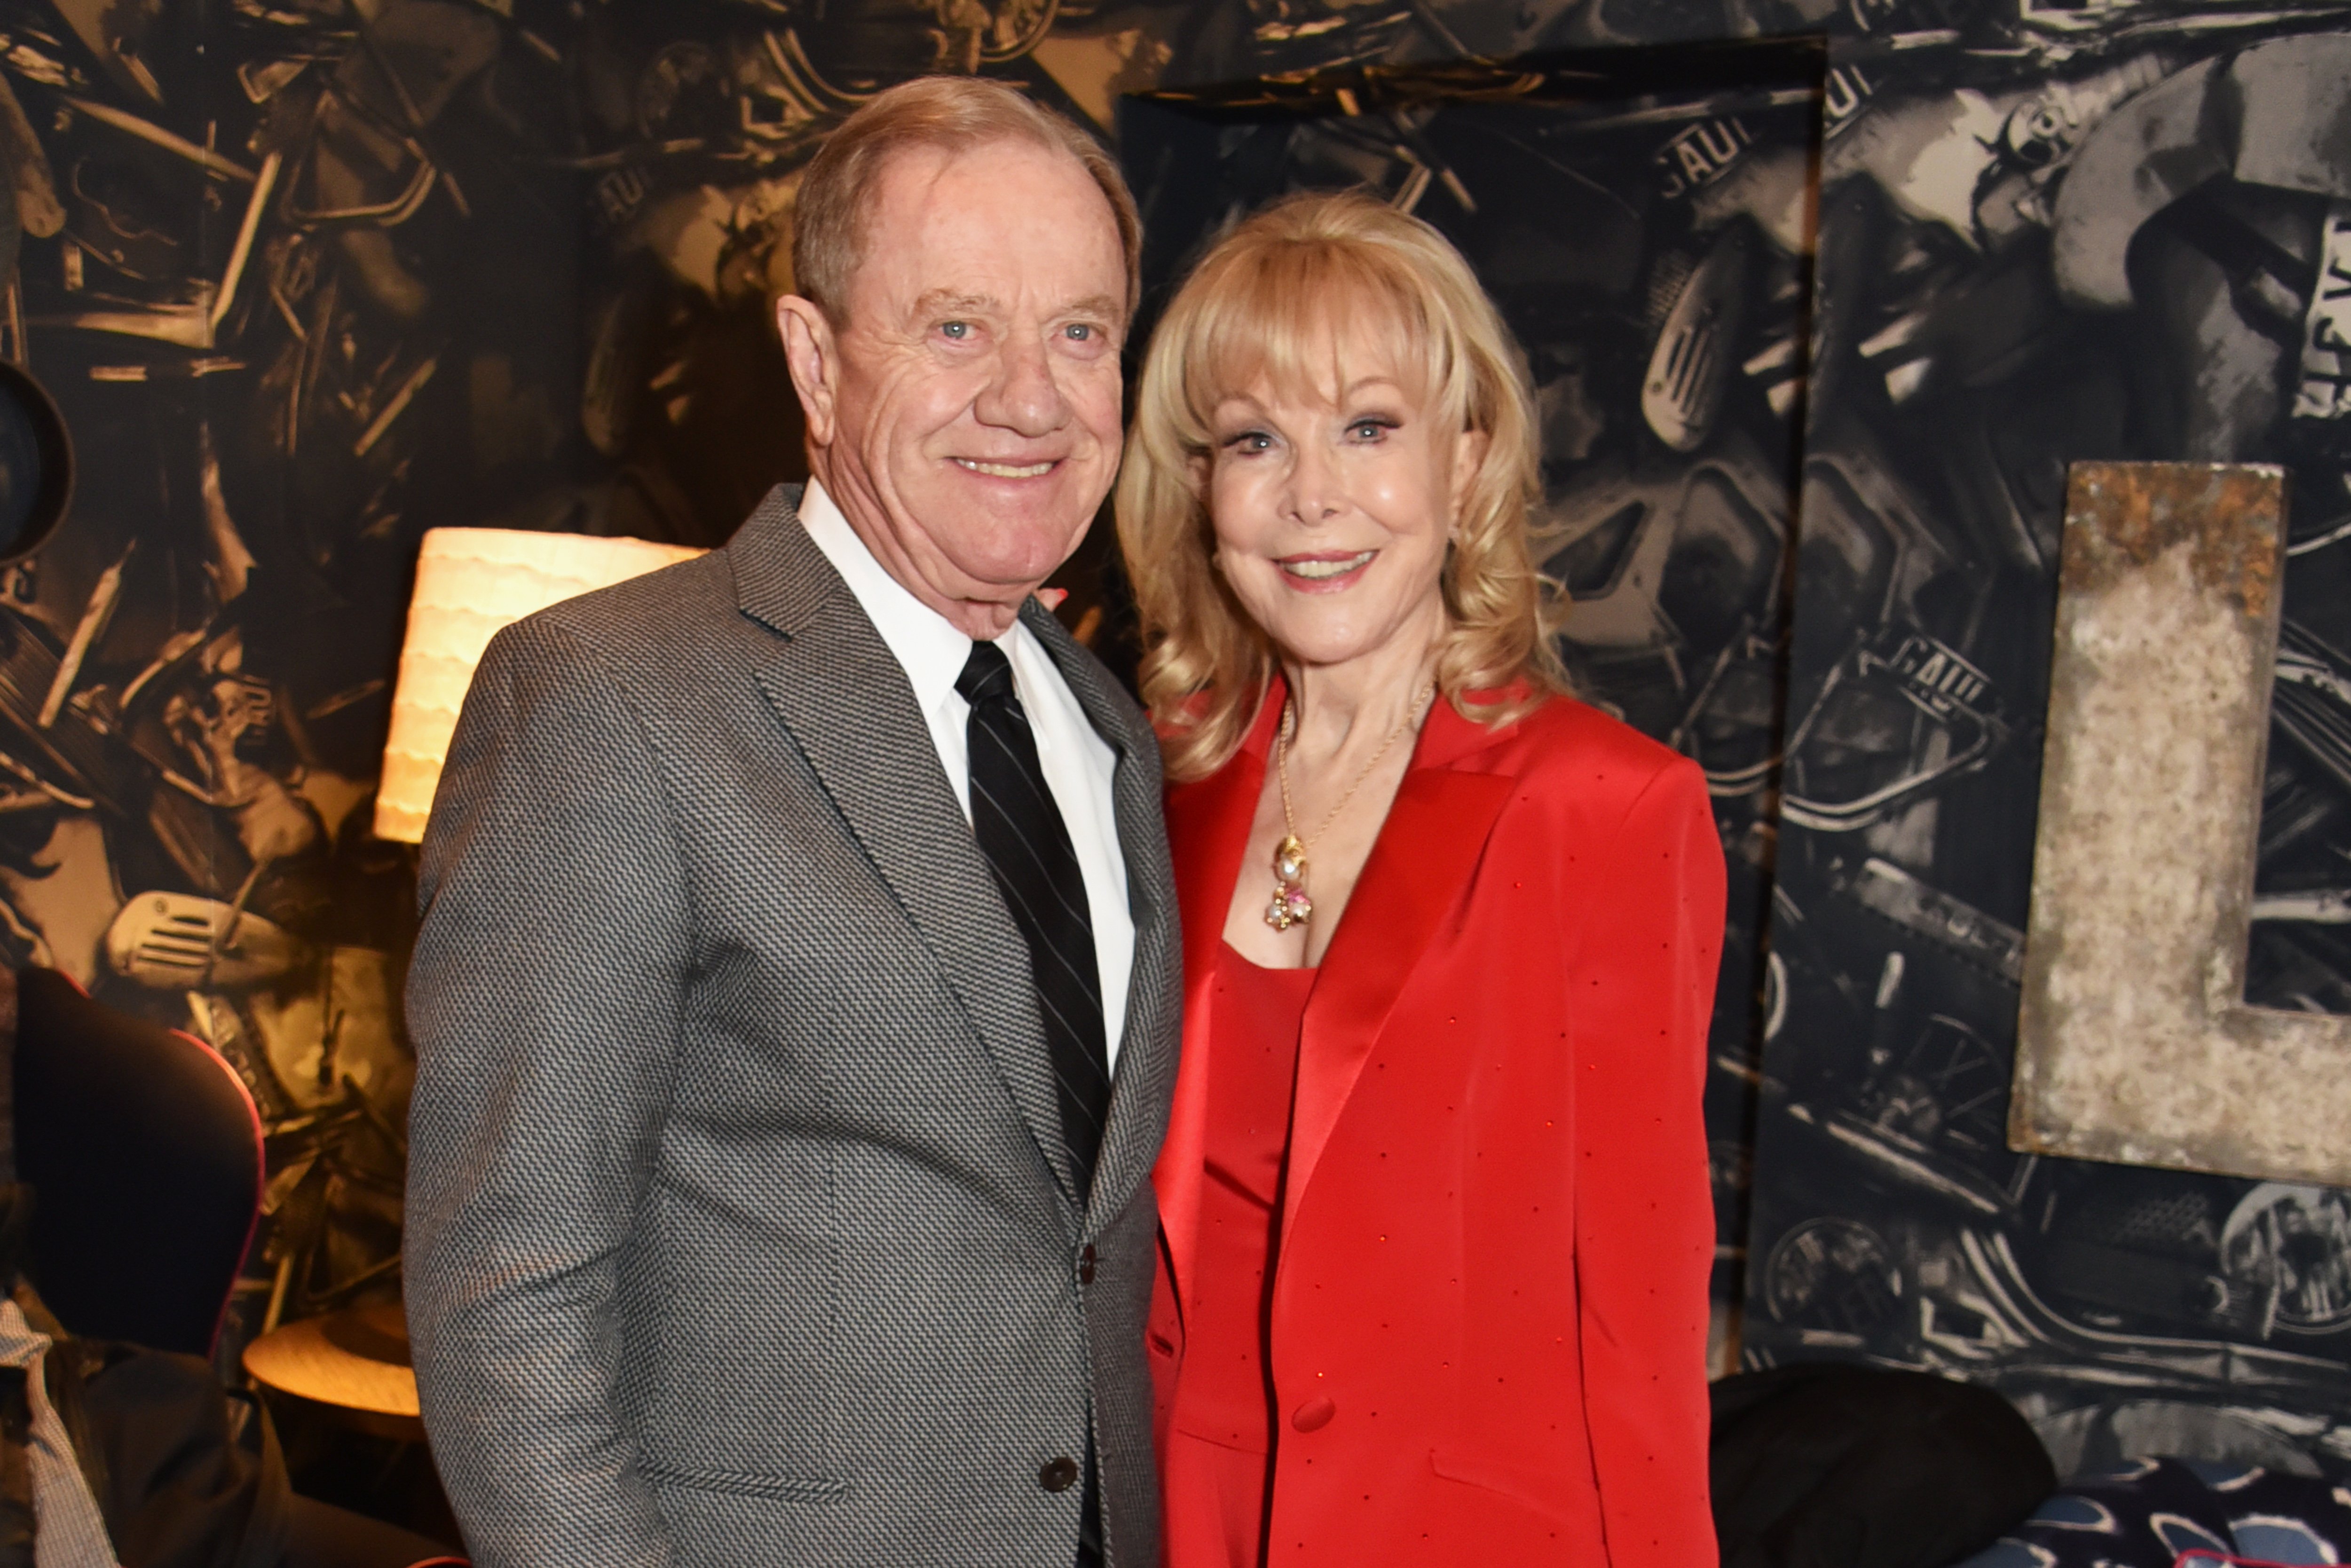 Barbara Eden (R) and Jon Eicholtz attend the press night after party for "Ruthless! The Musical" at The Ham Yard Hotel on March 27, 2018 | Source: Getty Images